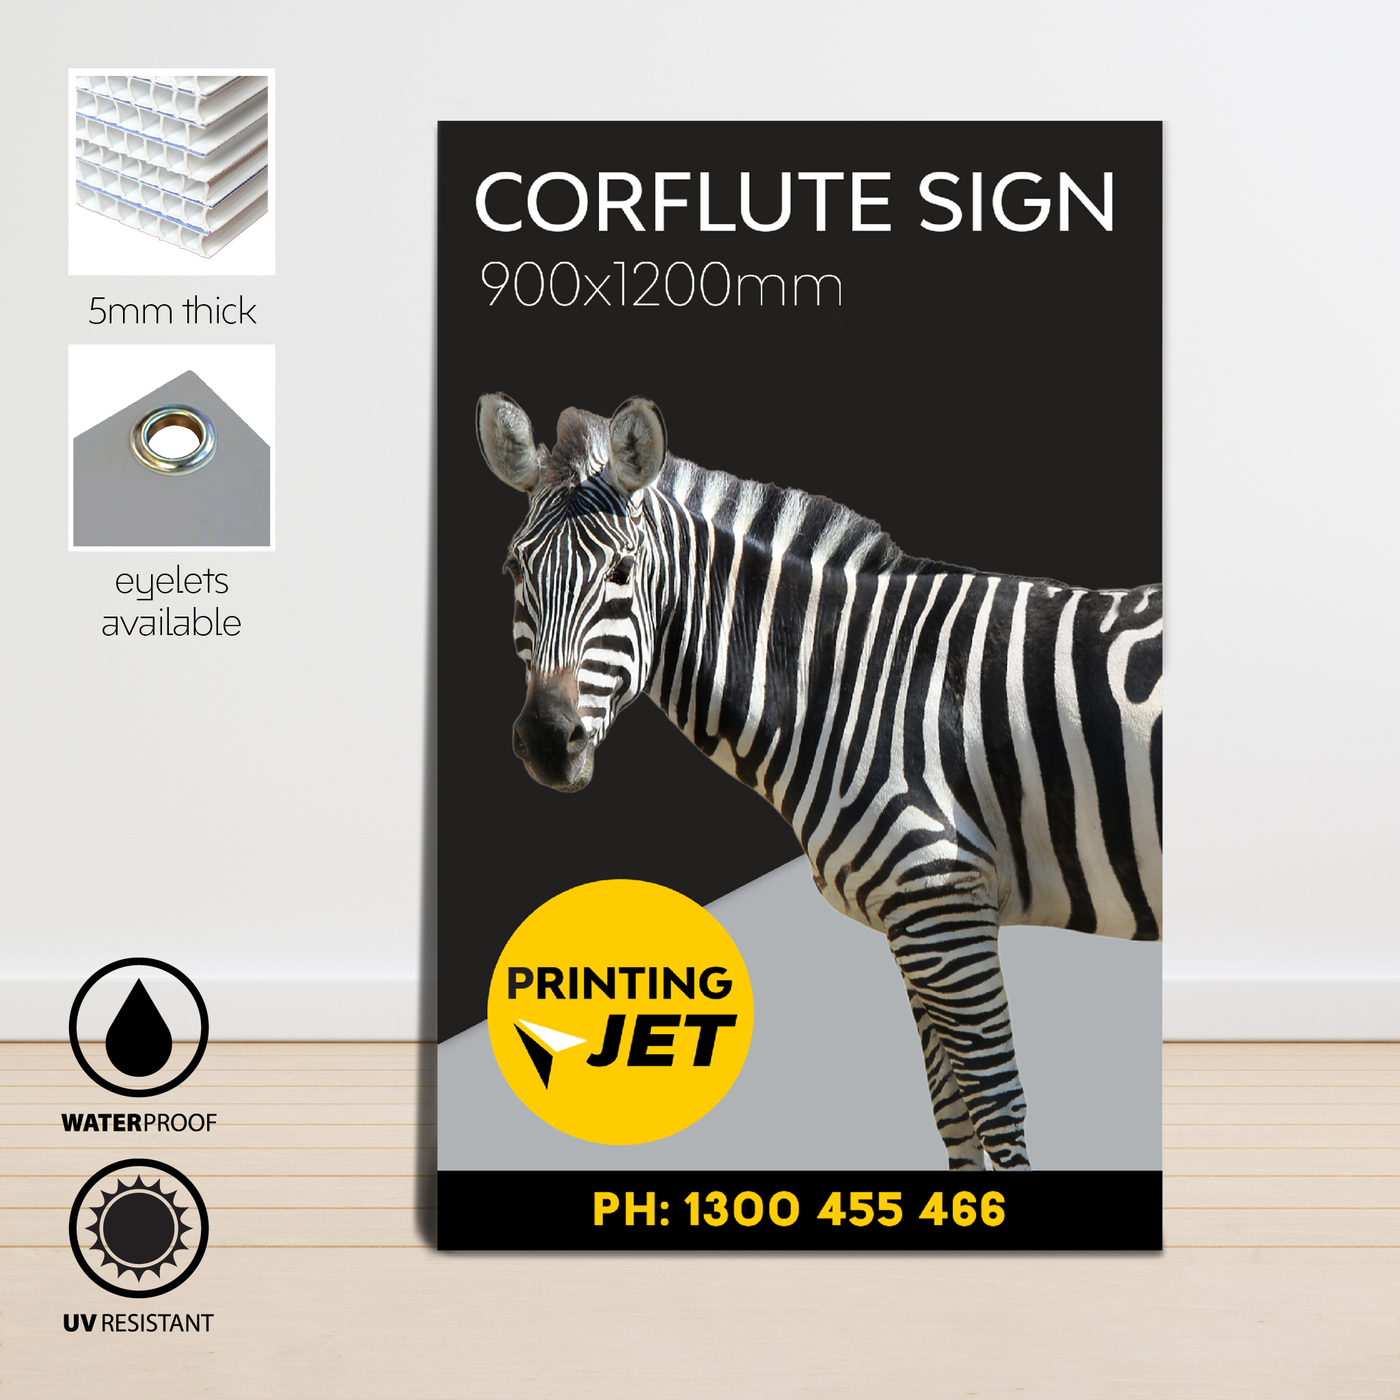 900 x 1200mm Corflute Signs